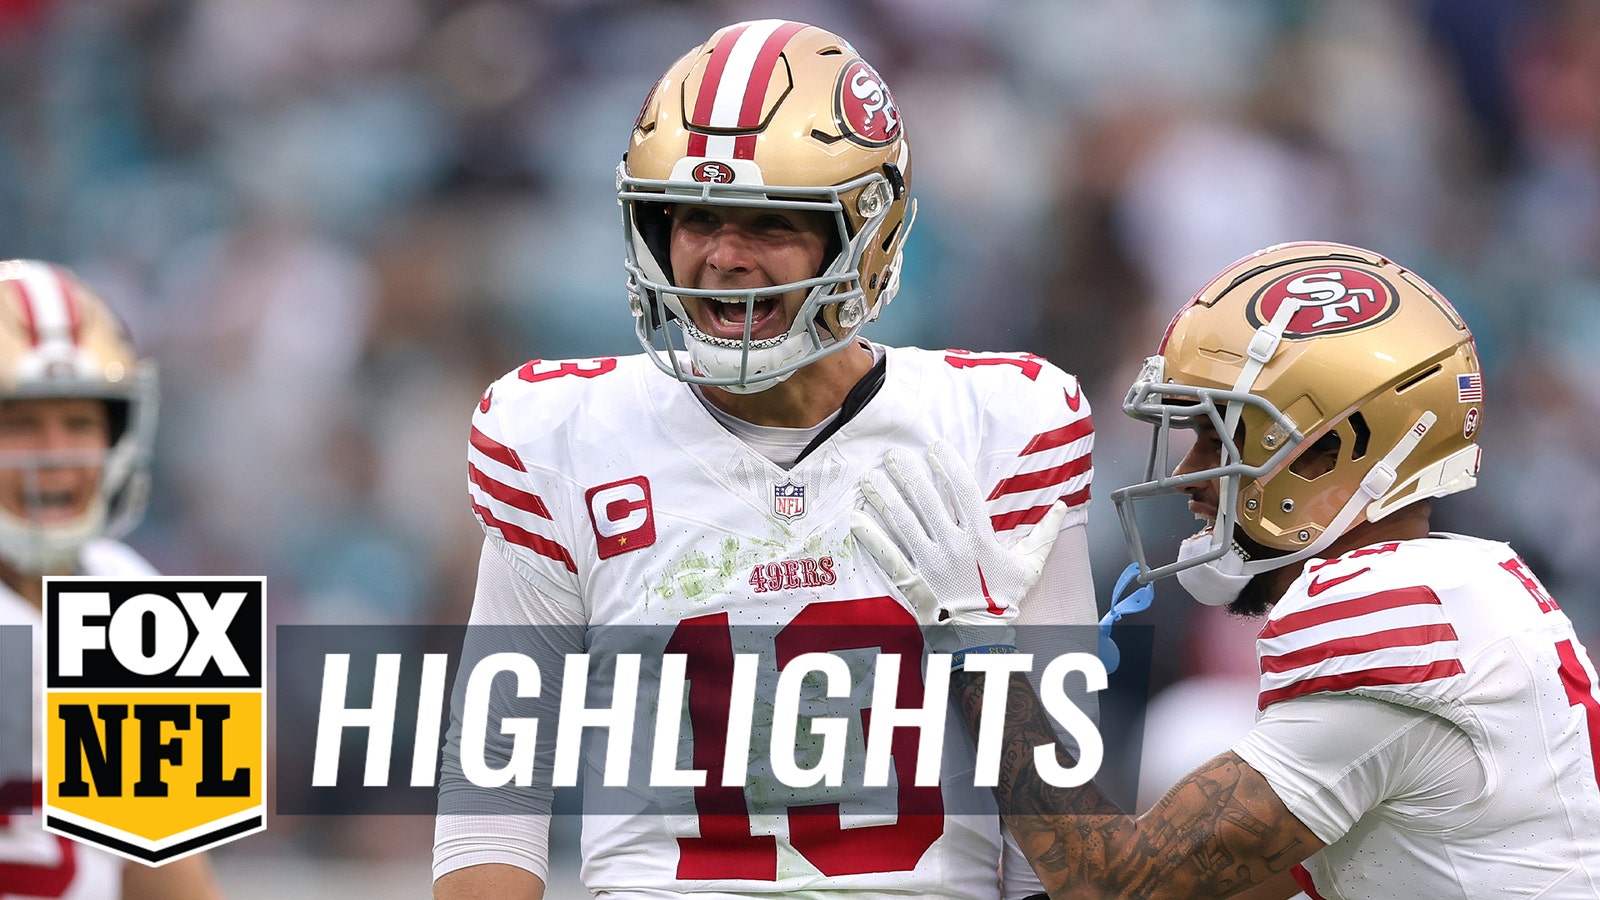 Brock Purdy throws for 296 yards, three TDs in 49ers' win over Jaguars